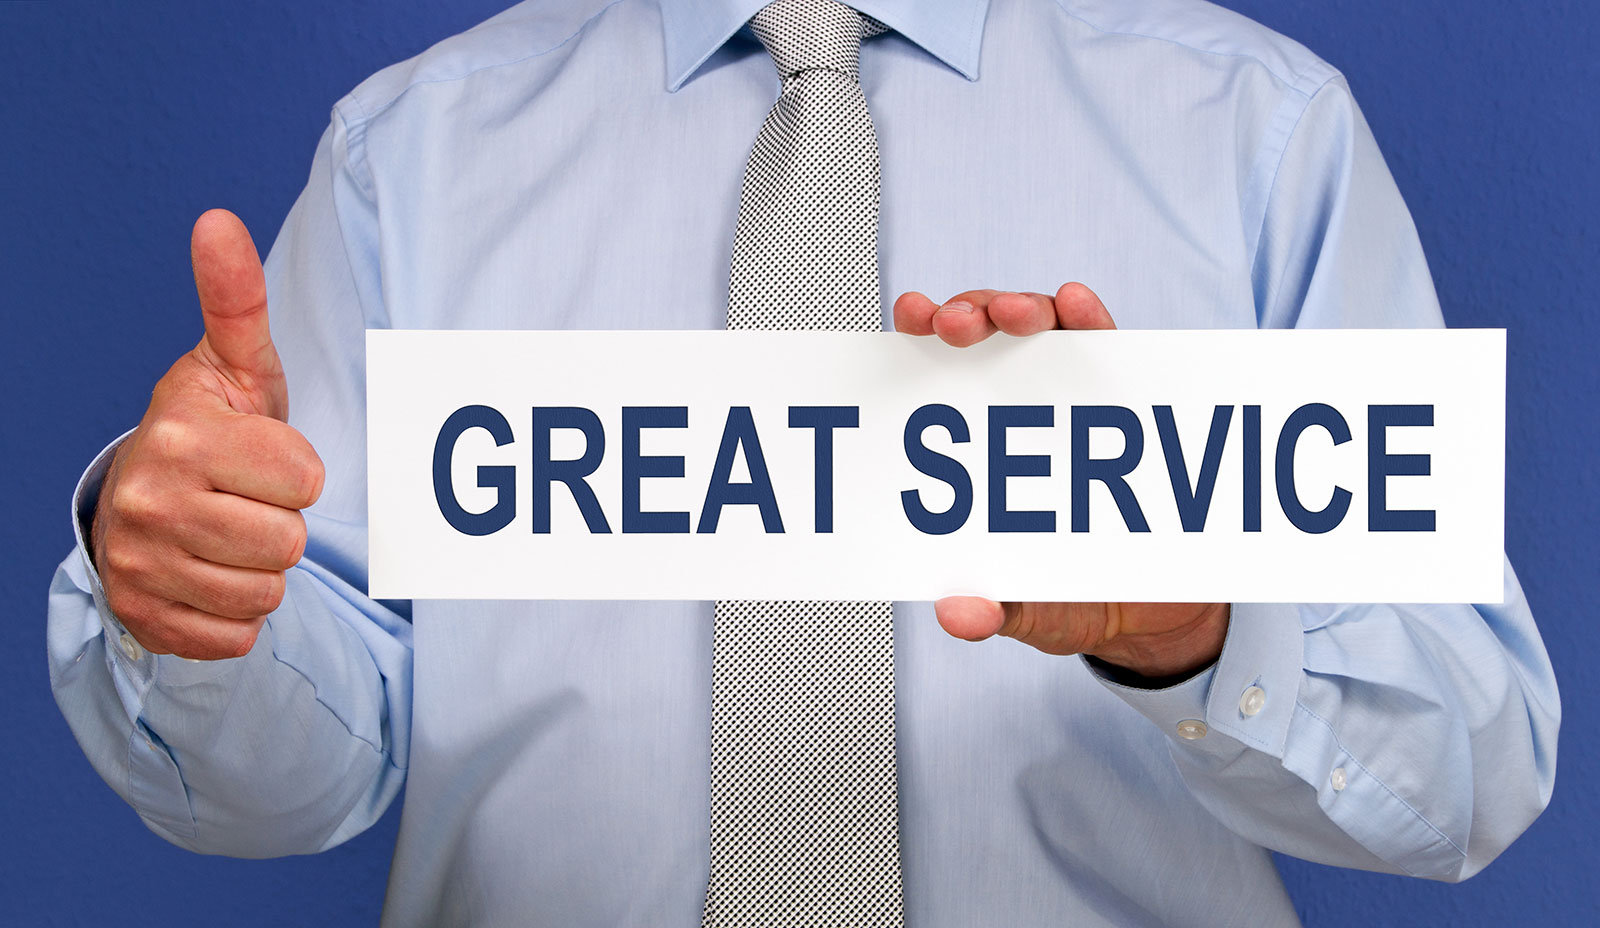 What Are the Four Components of Great Service?